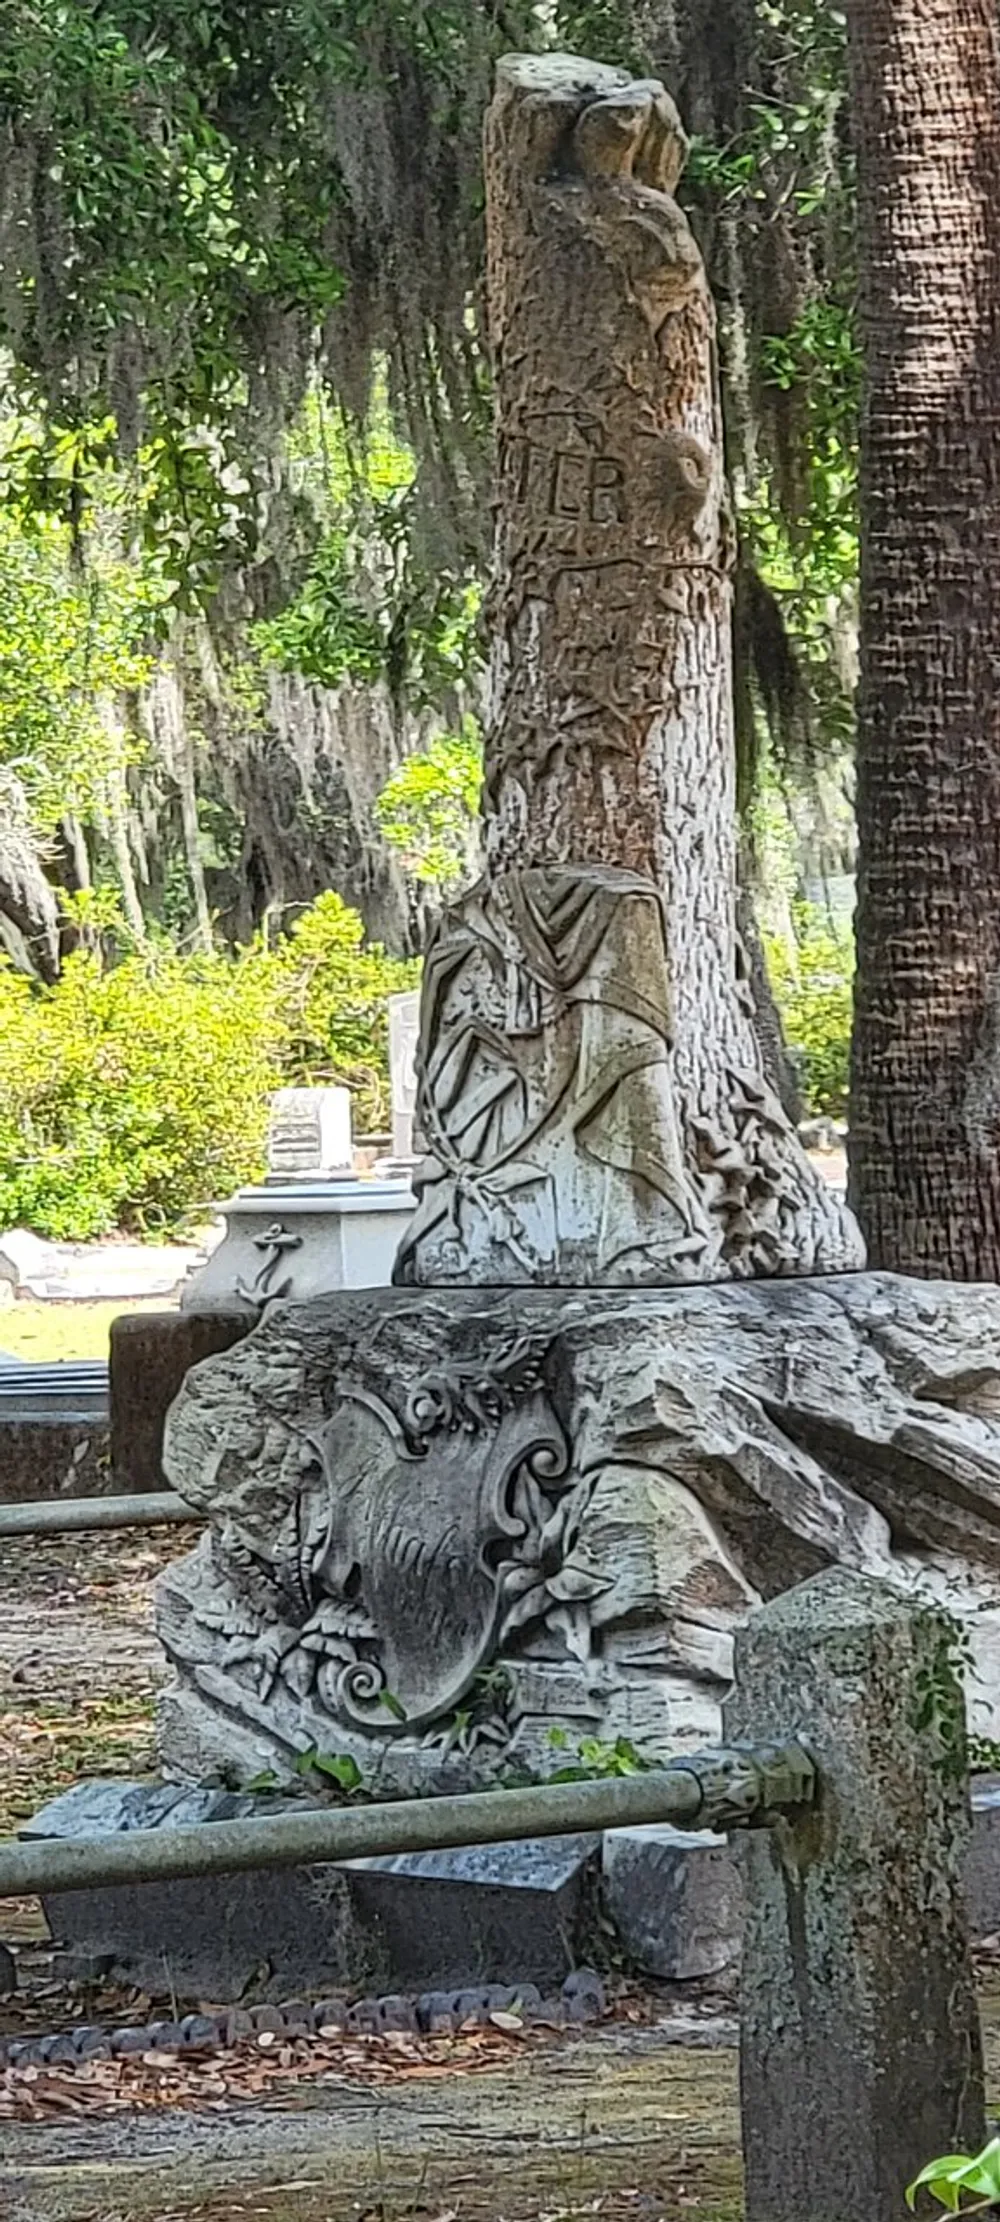 The image shows a weathered stone sculpture possibly part of a grave or monument featuring a draped figure and decorative elements set against a backdrop of trees draped with Spanish moss